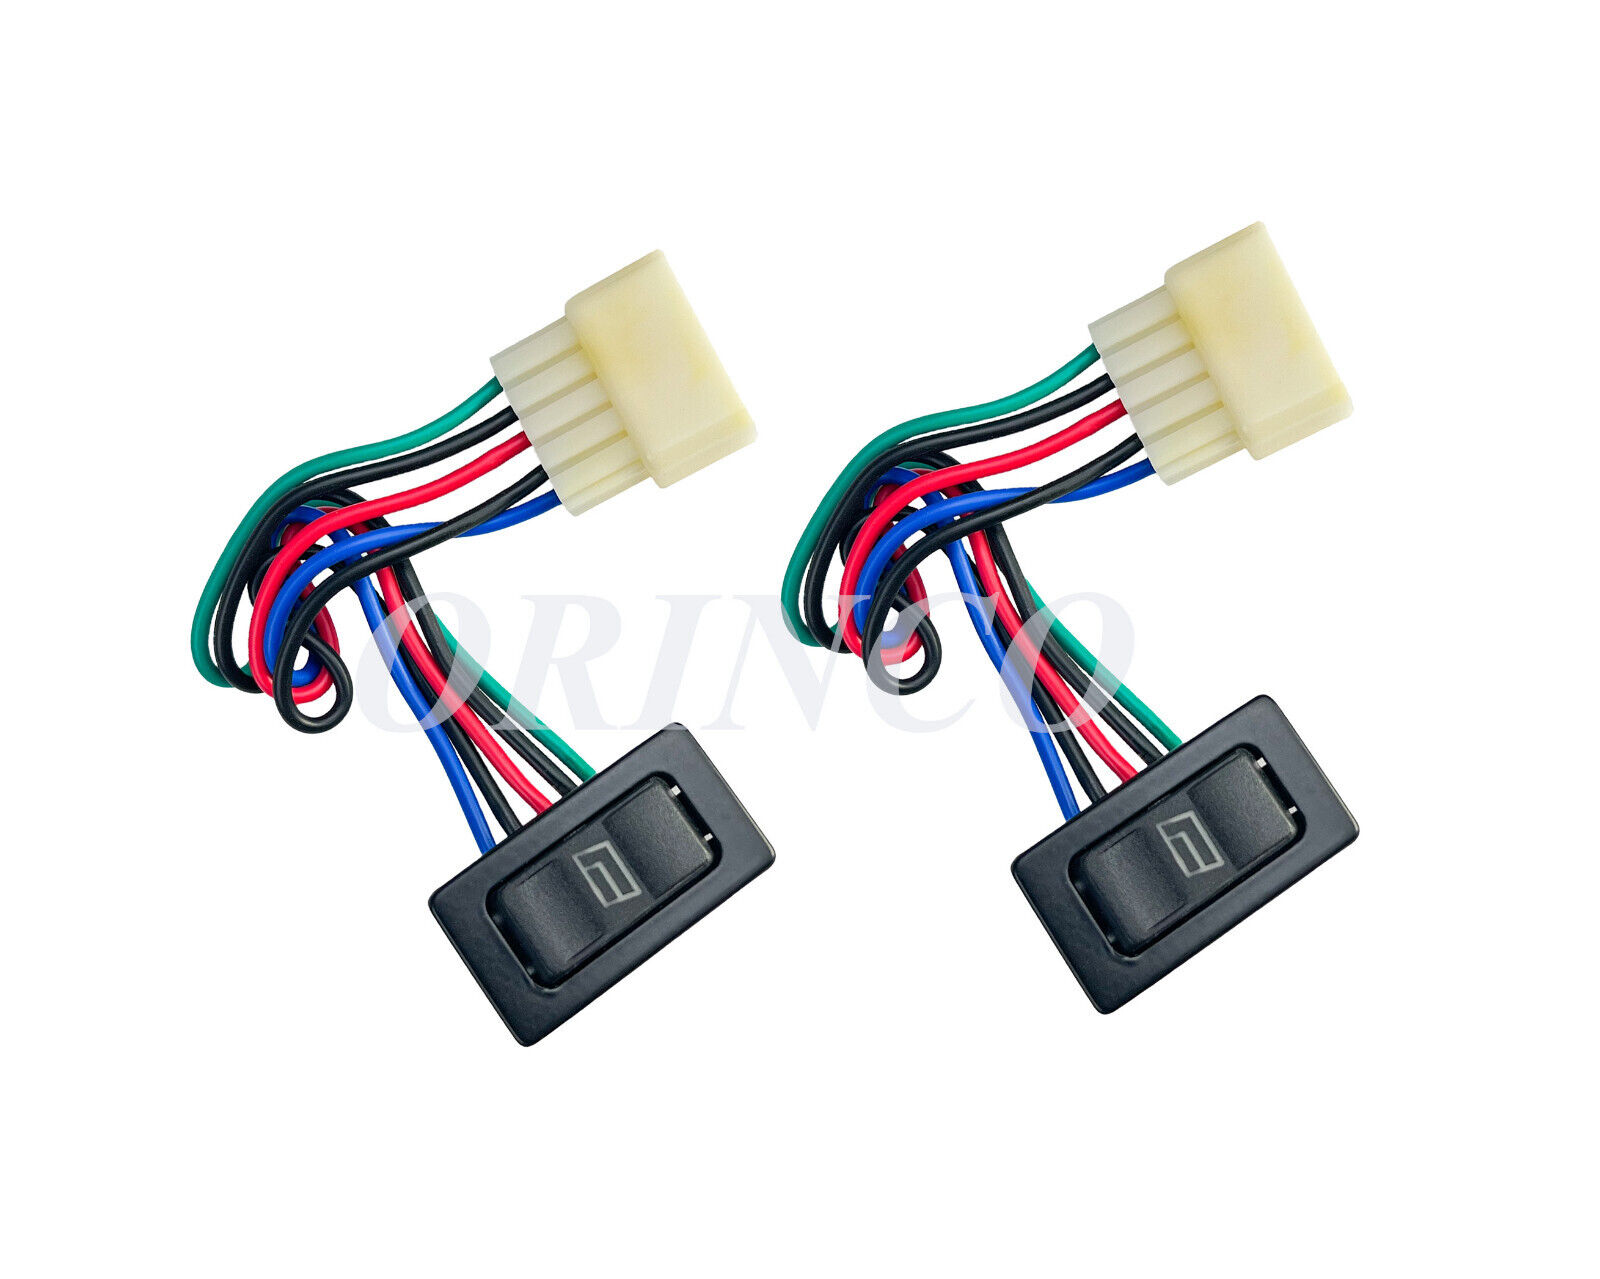 2) RS311 - UNIVERSAL POWER WINDOW ROCKER SWITCHE WITH 12V 5 WIRES AND SOCKET